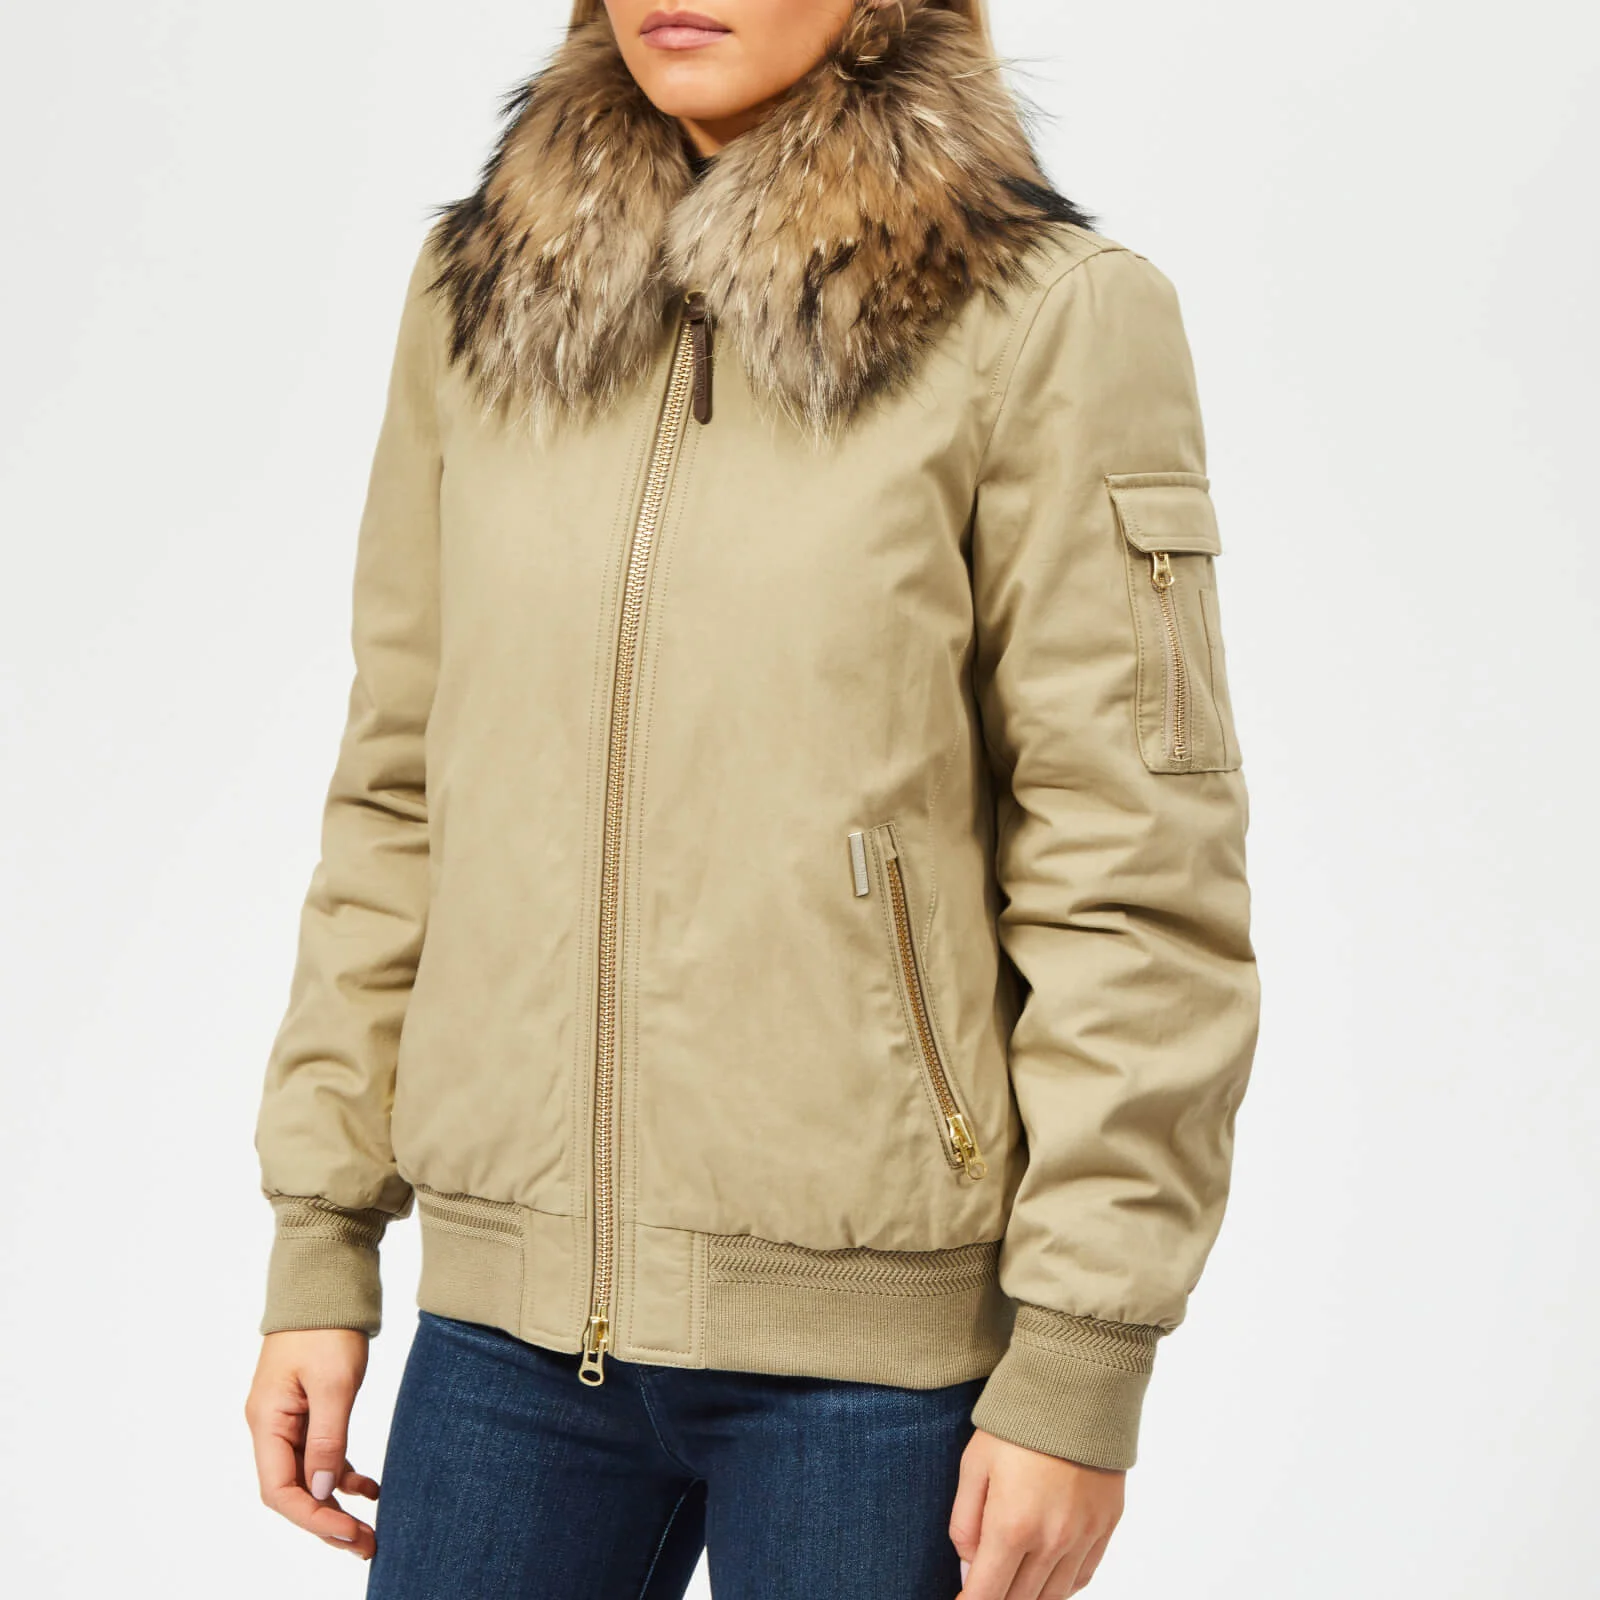 Woolrich Women's Silverdale Bomber Jacket - Natural Image 1